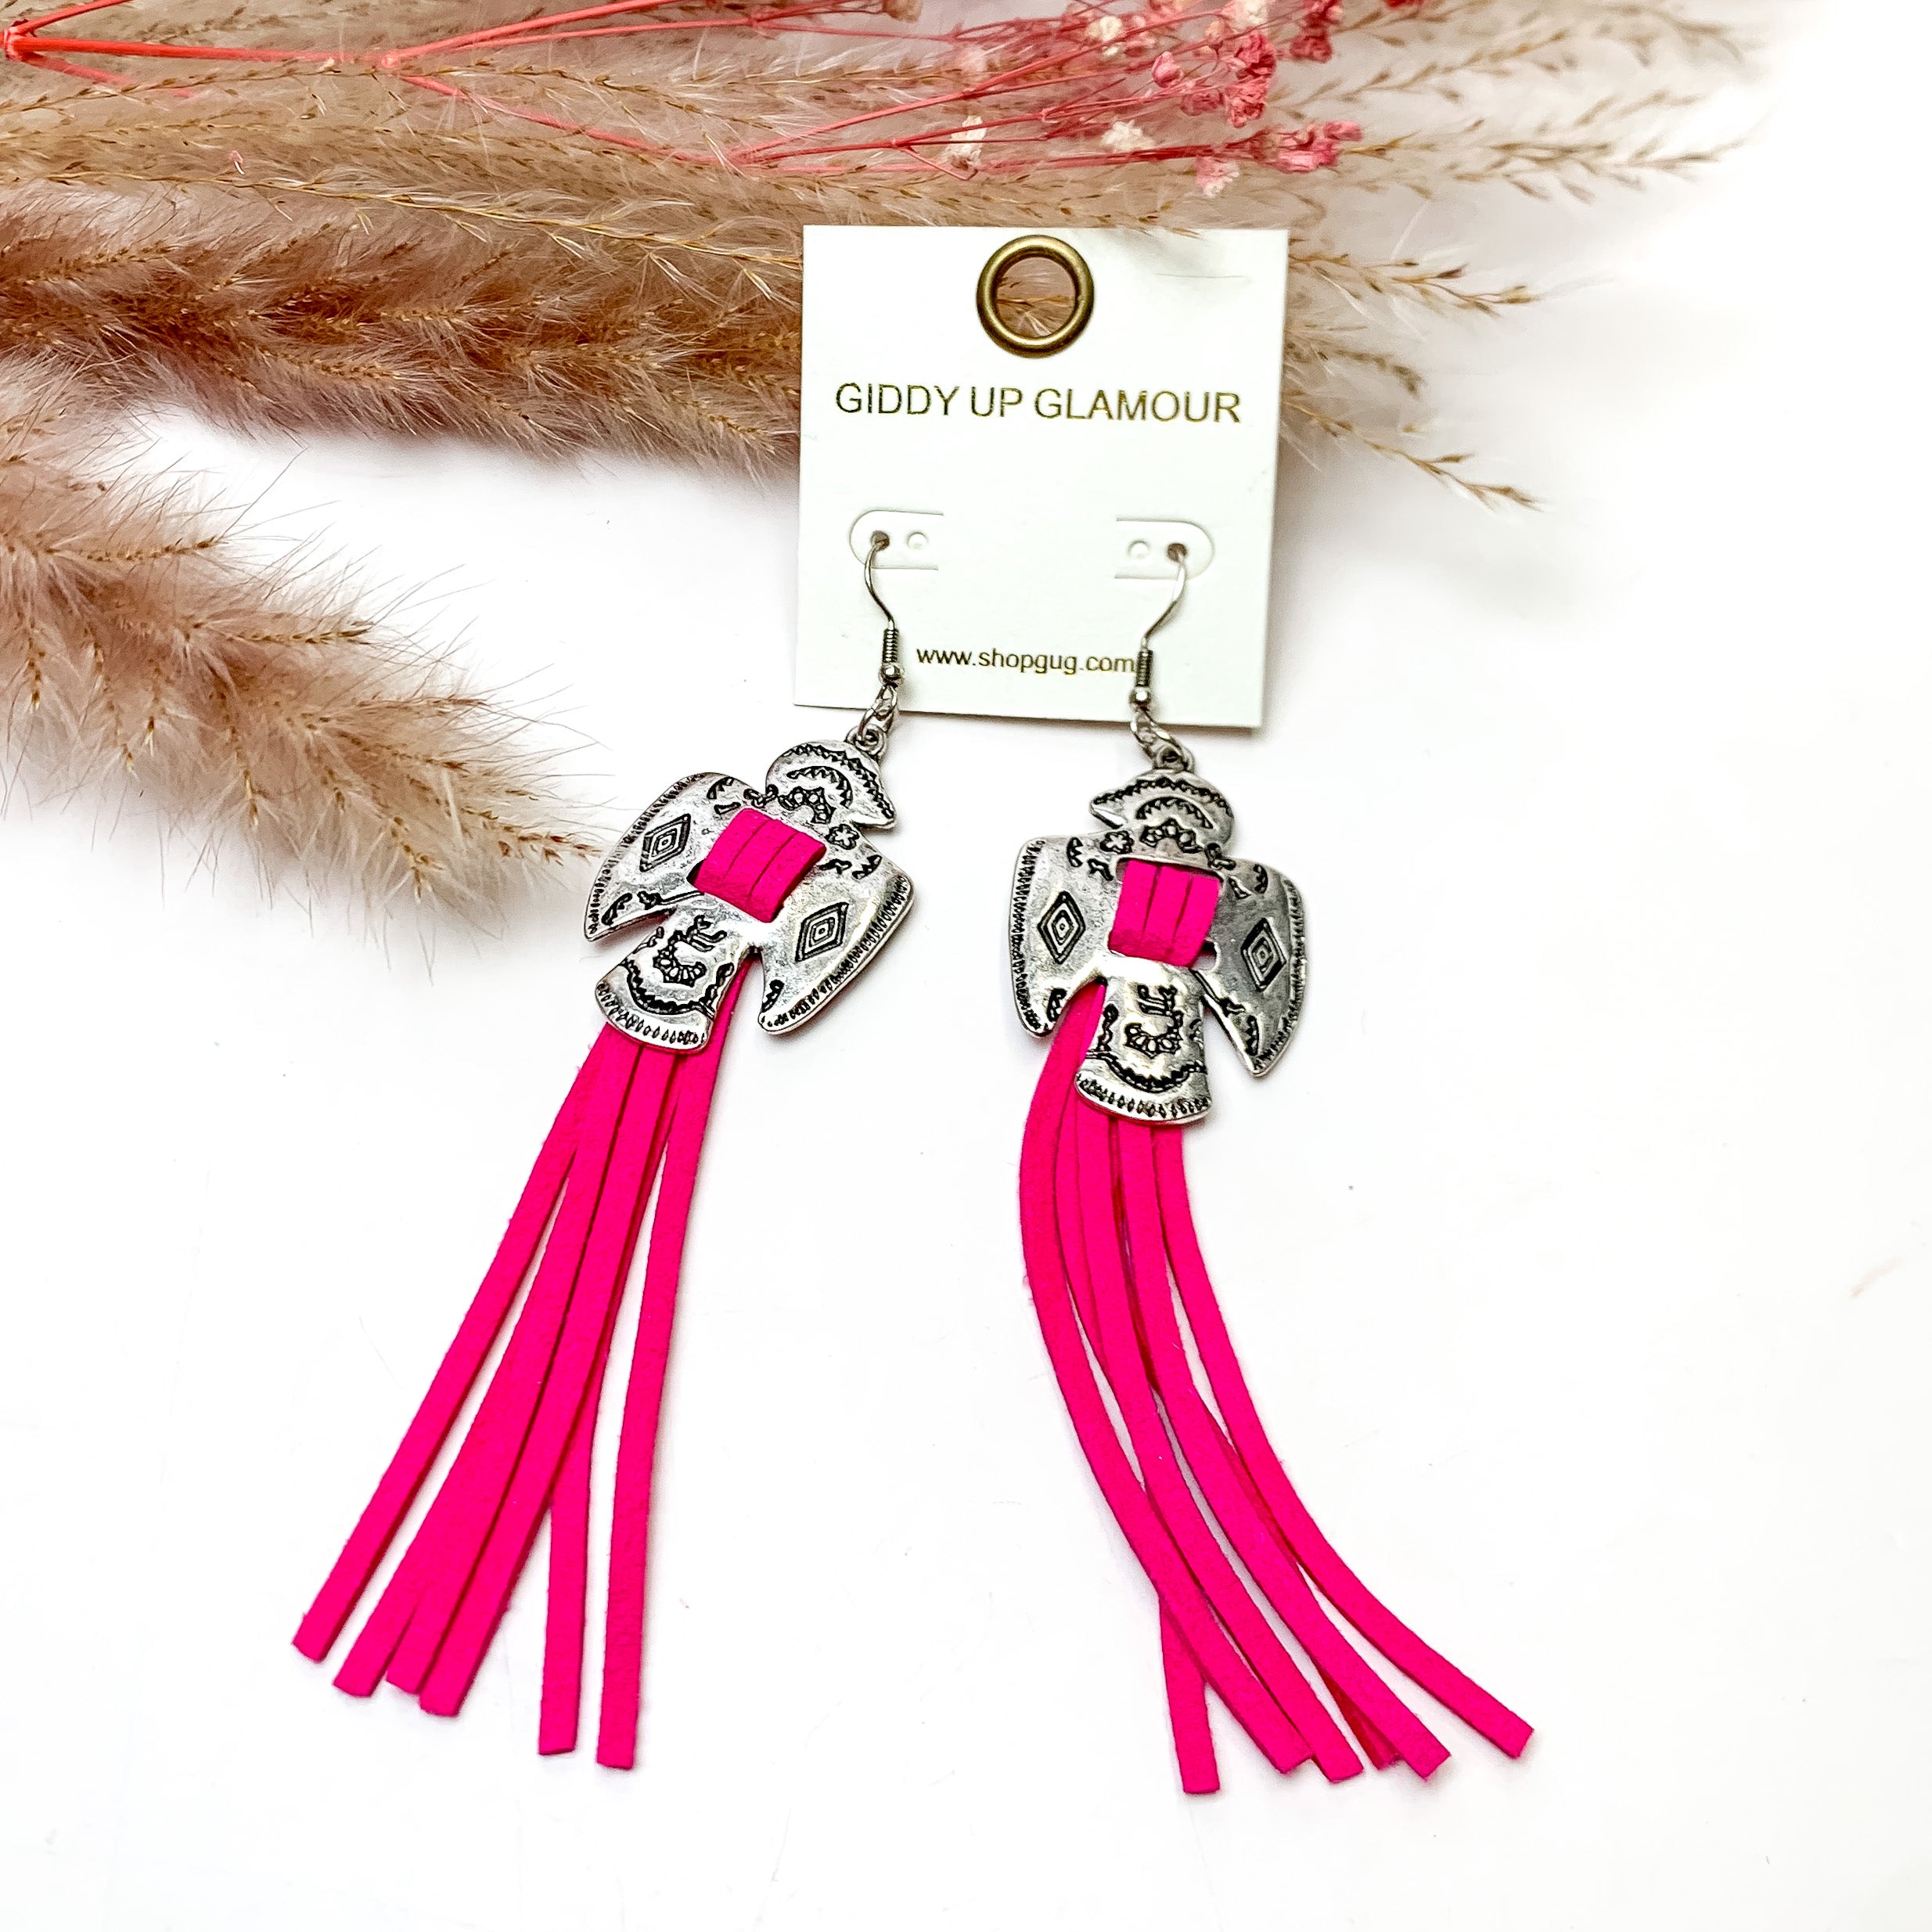 Thunderbird Tassel Earrings in Fuchsia. These earrings are pictured on a white background with flowers behind for decoration.